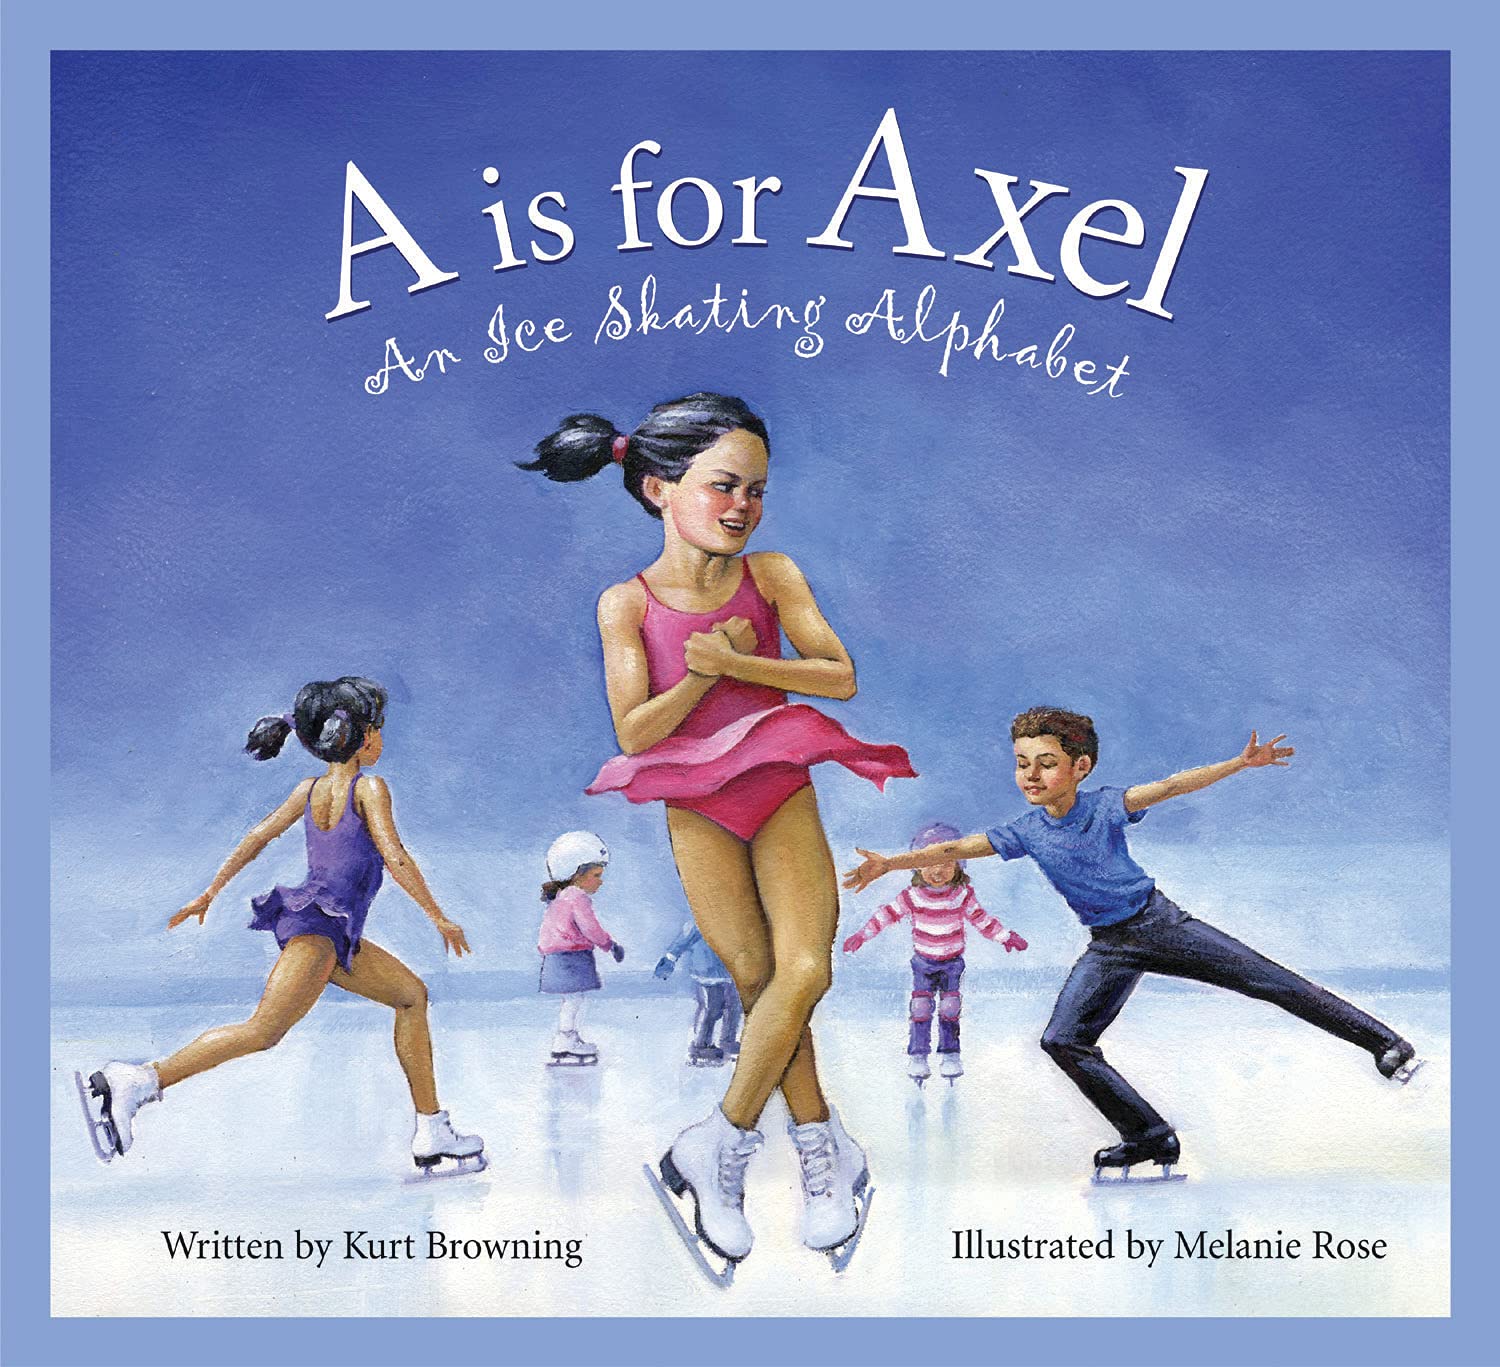 A is for Axel: An Ice Skating Alphabet by Kurt Browning book cover